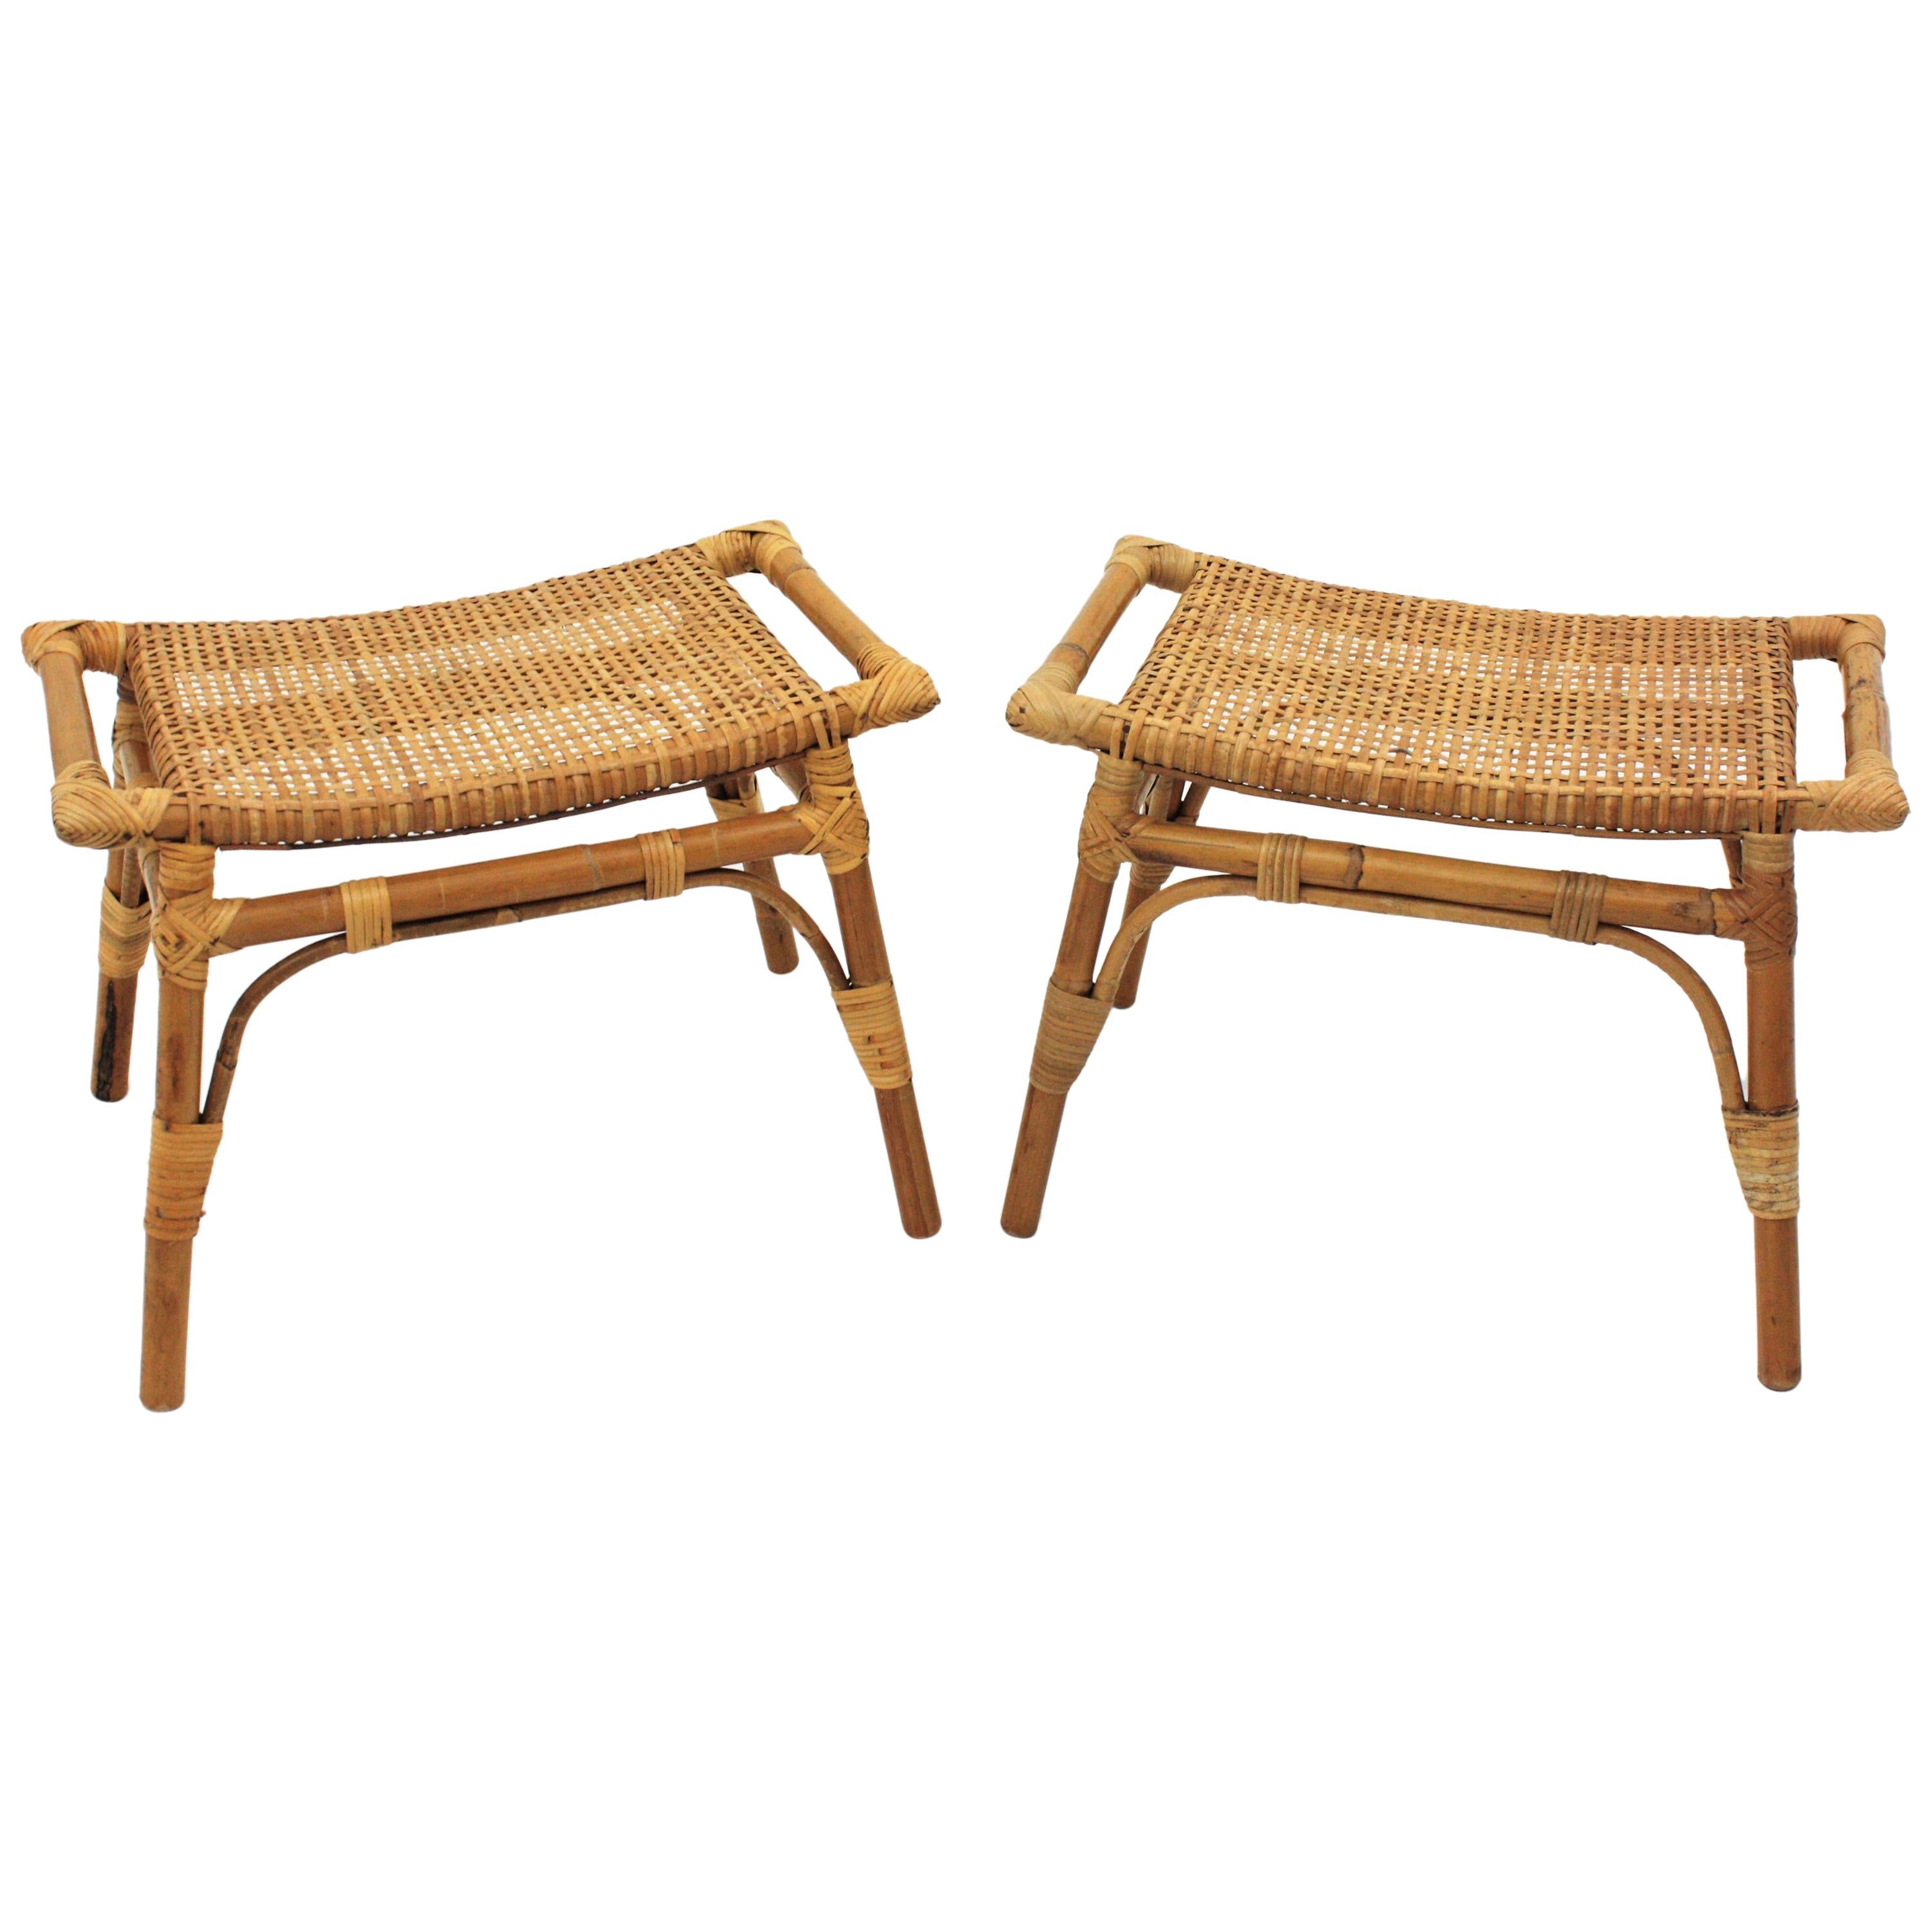 Pair of Bamboo Stools, Benches or Ottoman with Woven Wicker Cane Seats